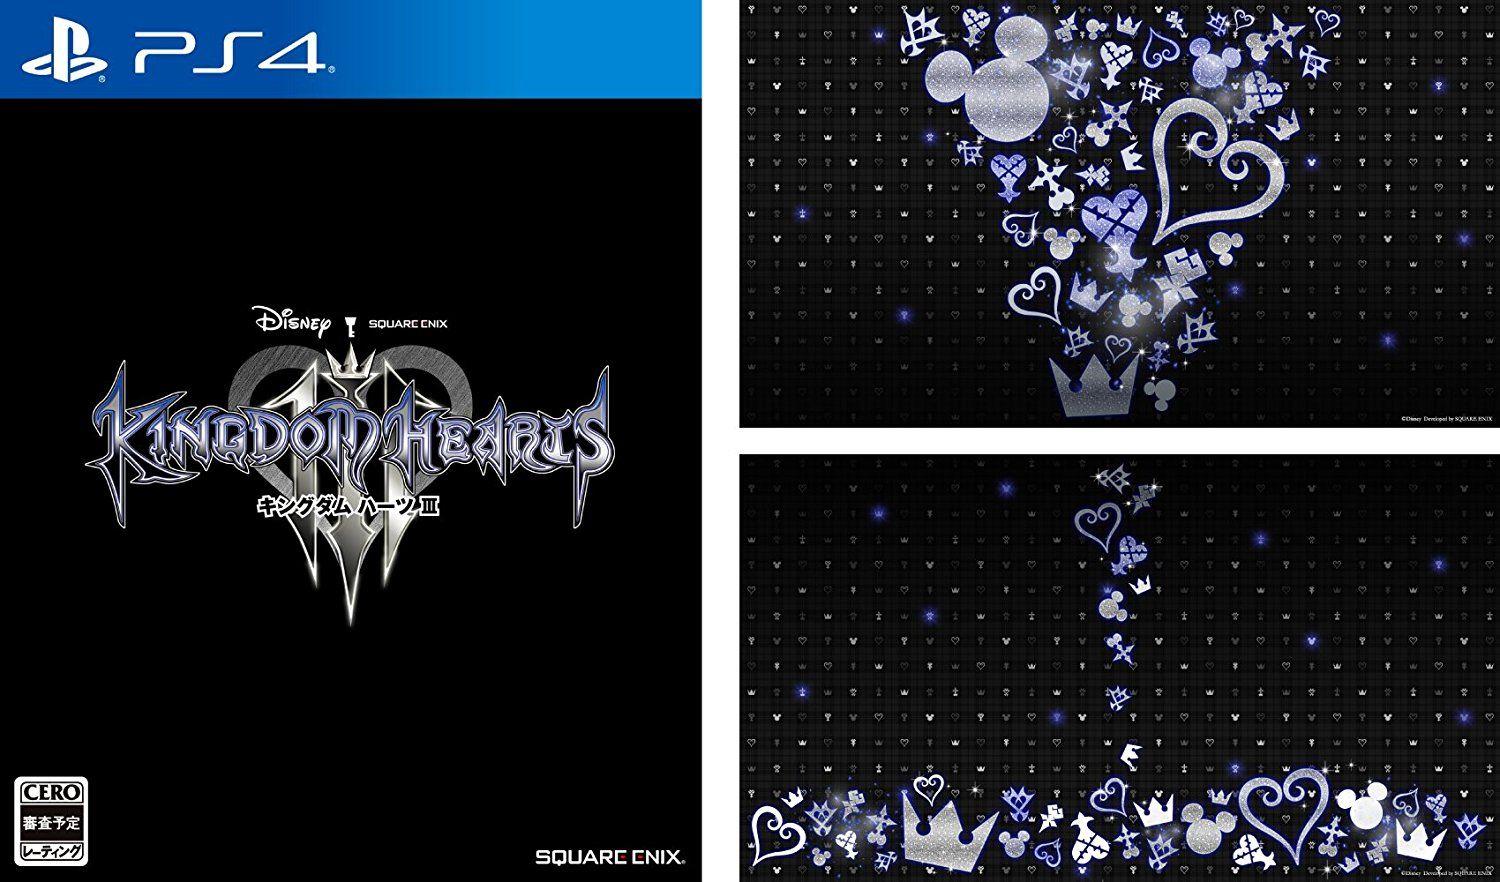 Pre Order The Japanese Edition Of Kingdom Hearts 3 On Amazon Japan